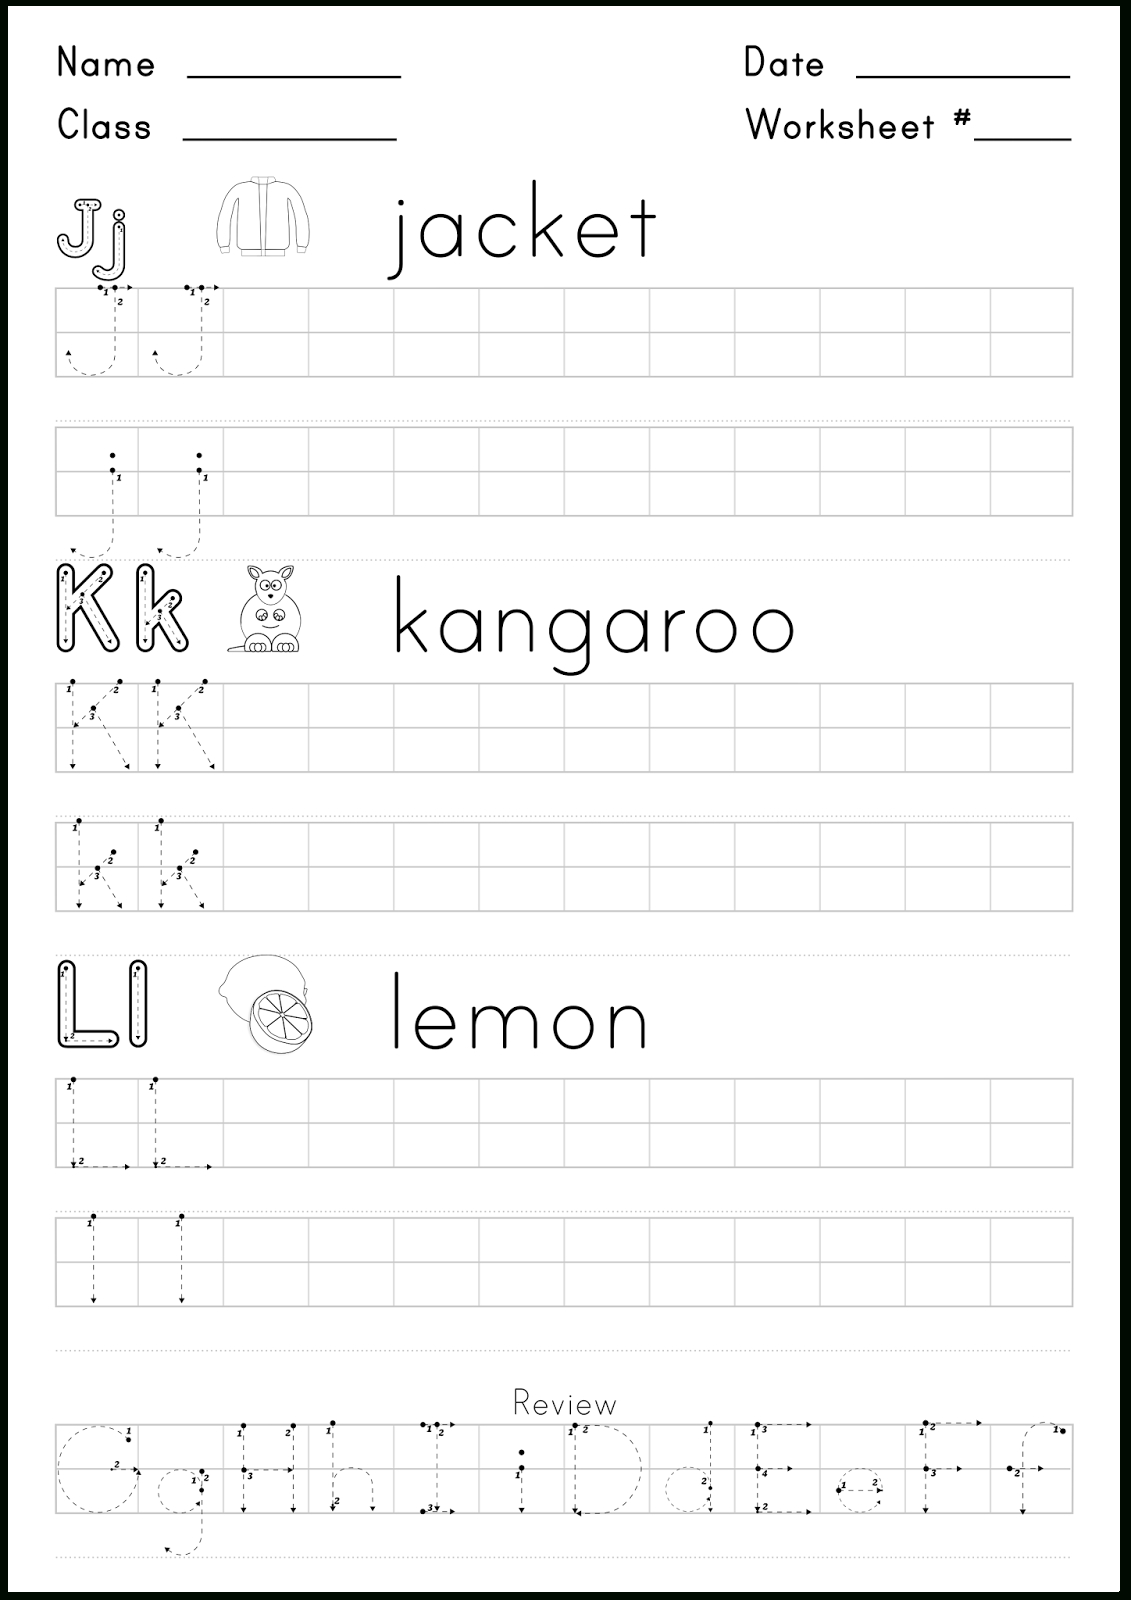 Worksheet For Writing The Letters J,k, And L. - Super for Letter Worksheets Review